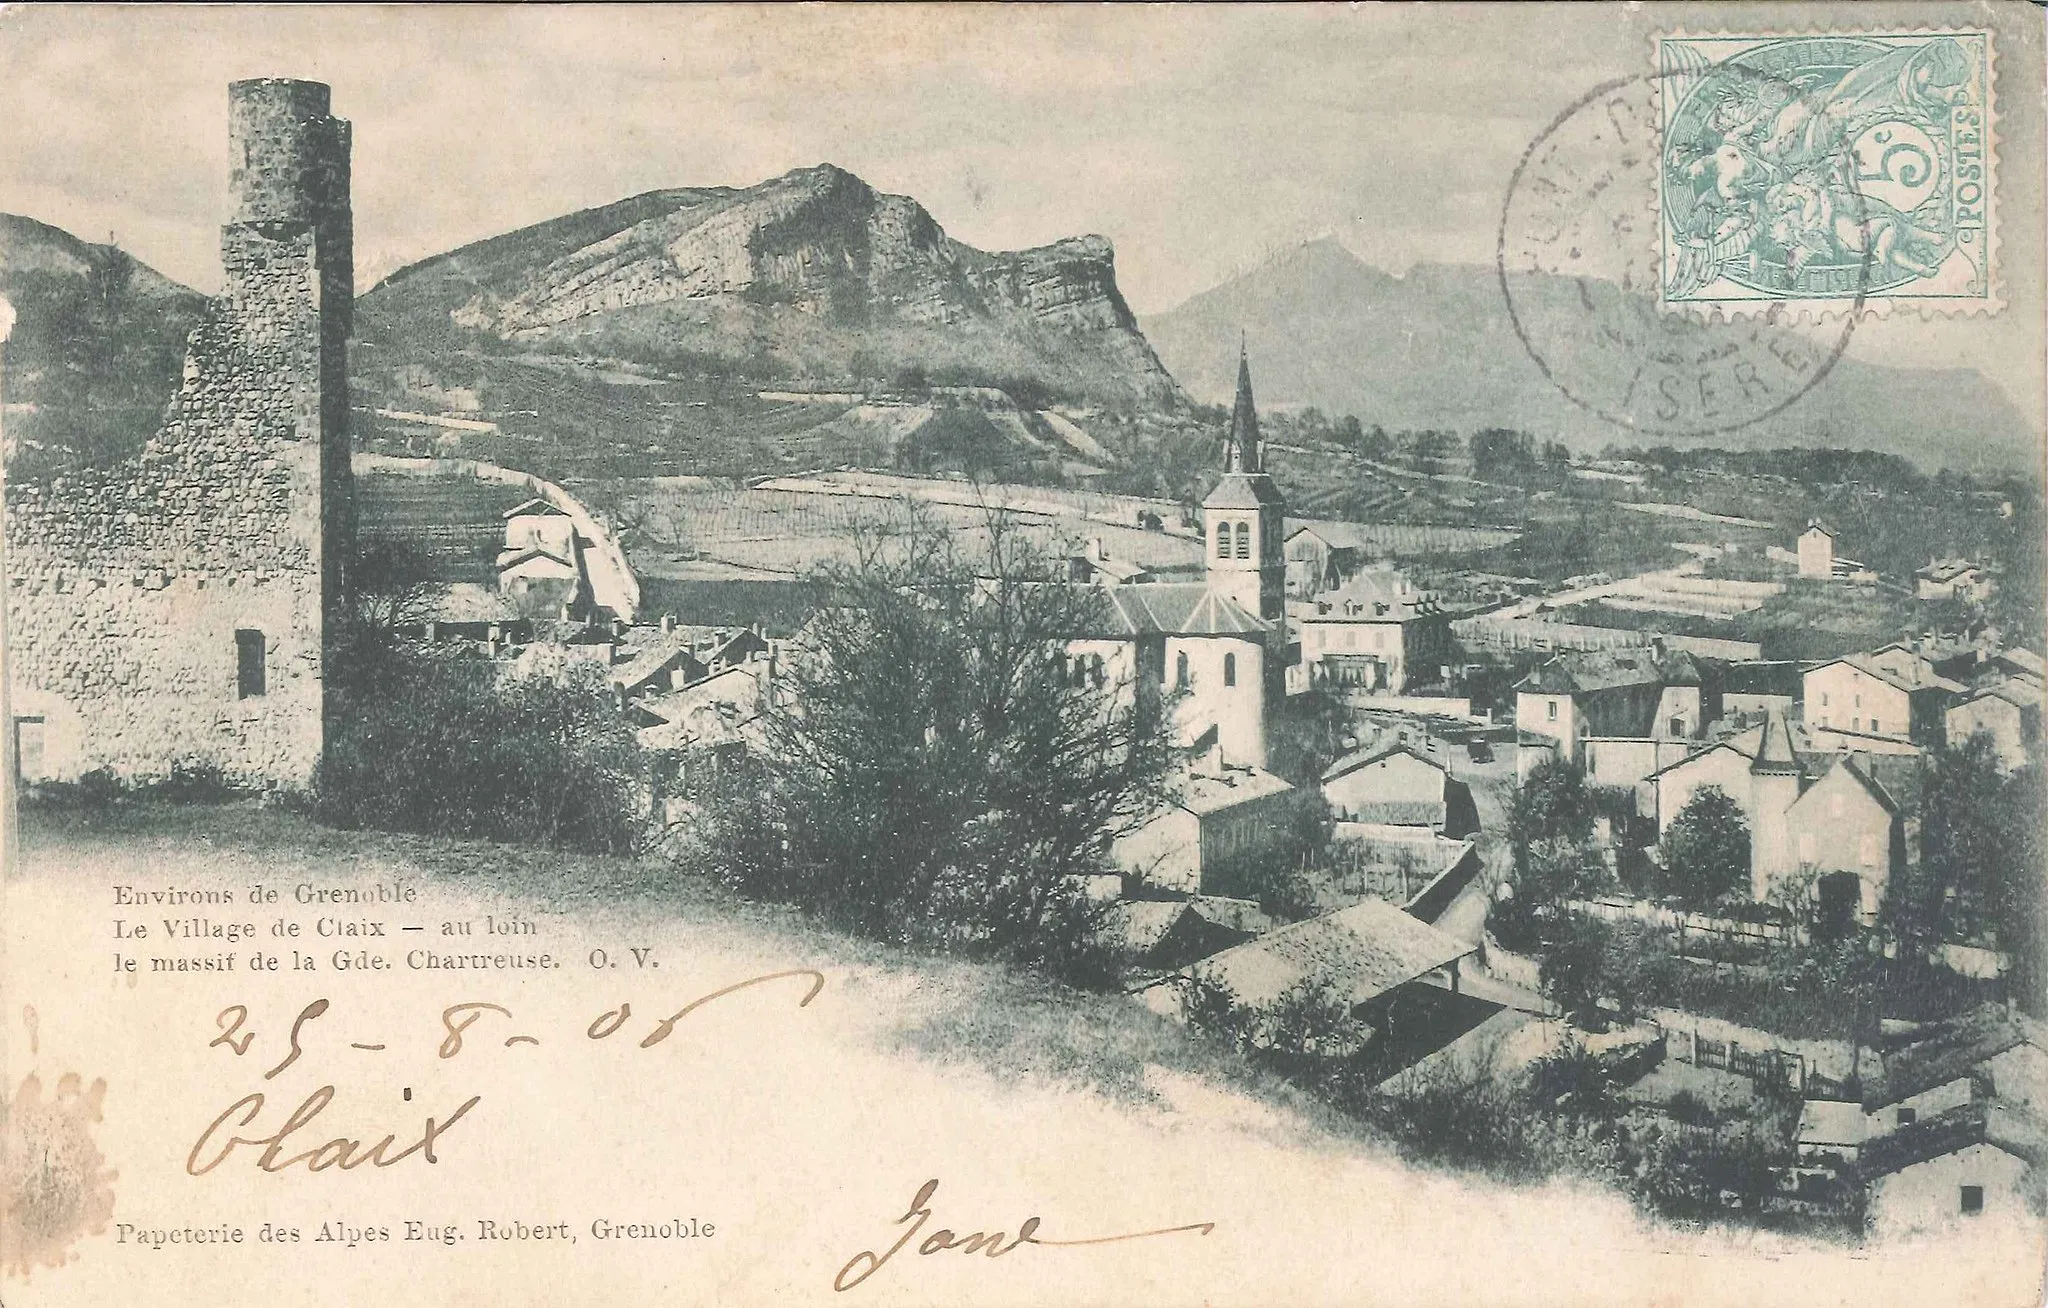 Photo showing: City of Claix, France, before 1906